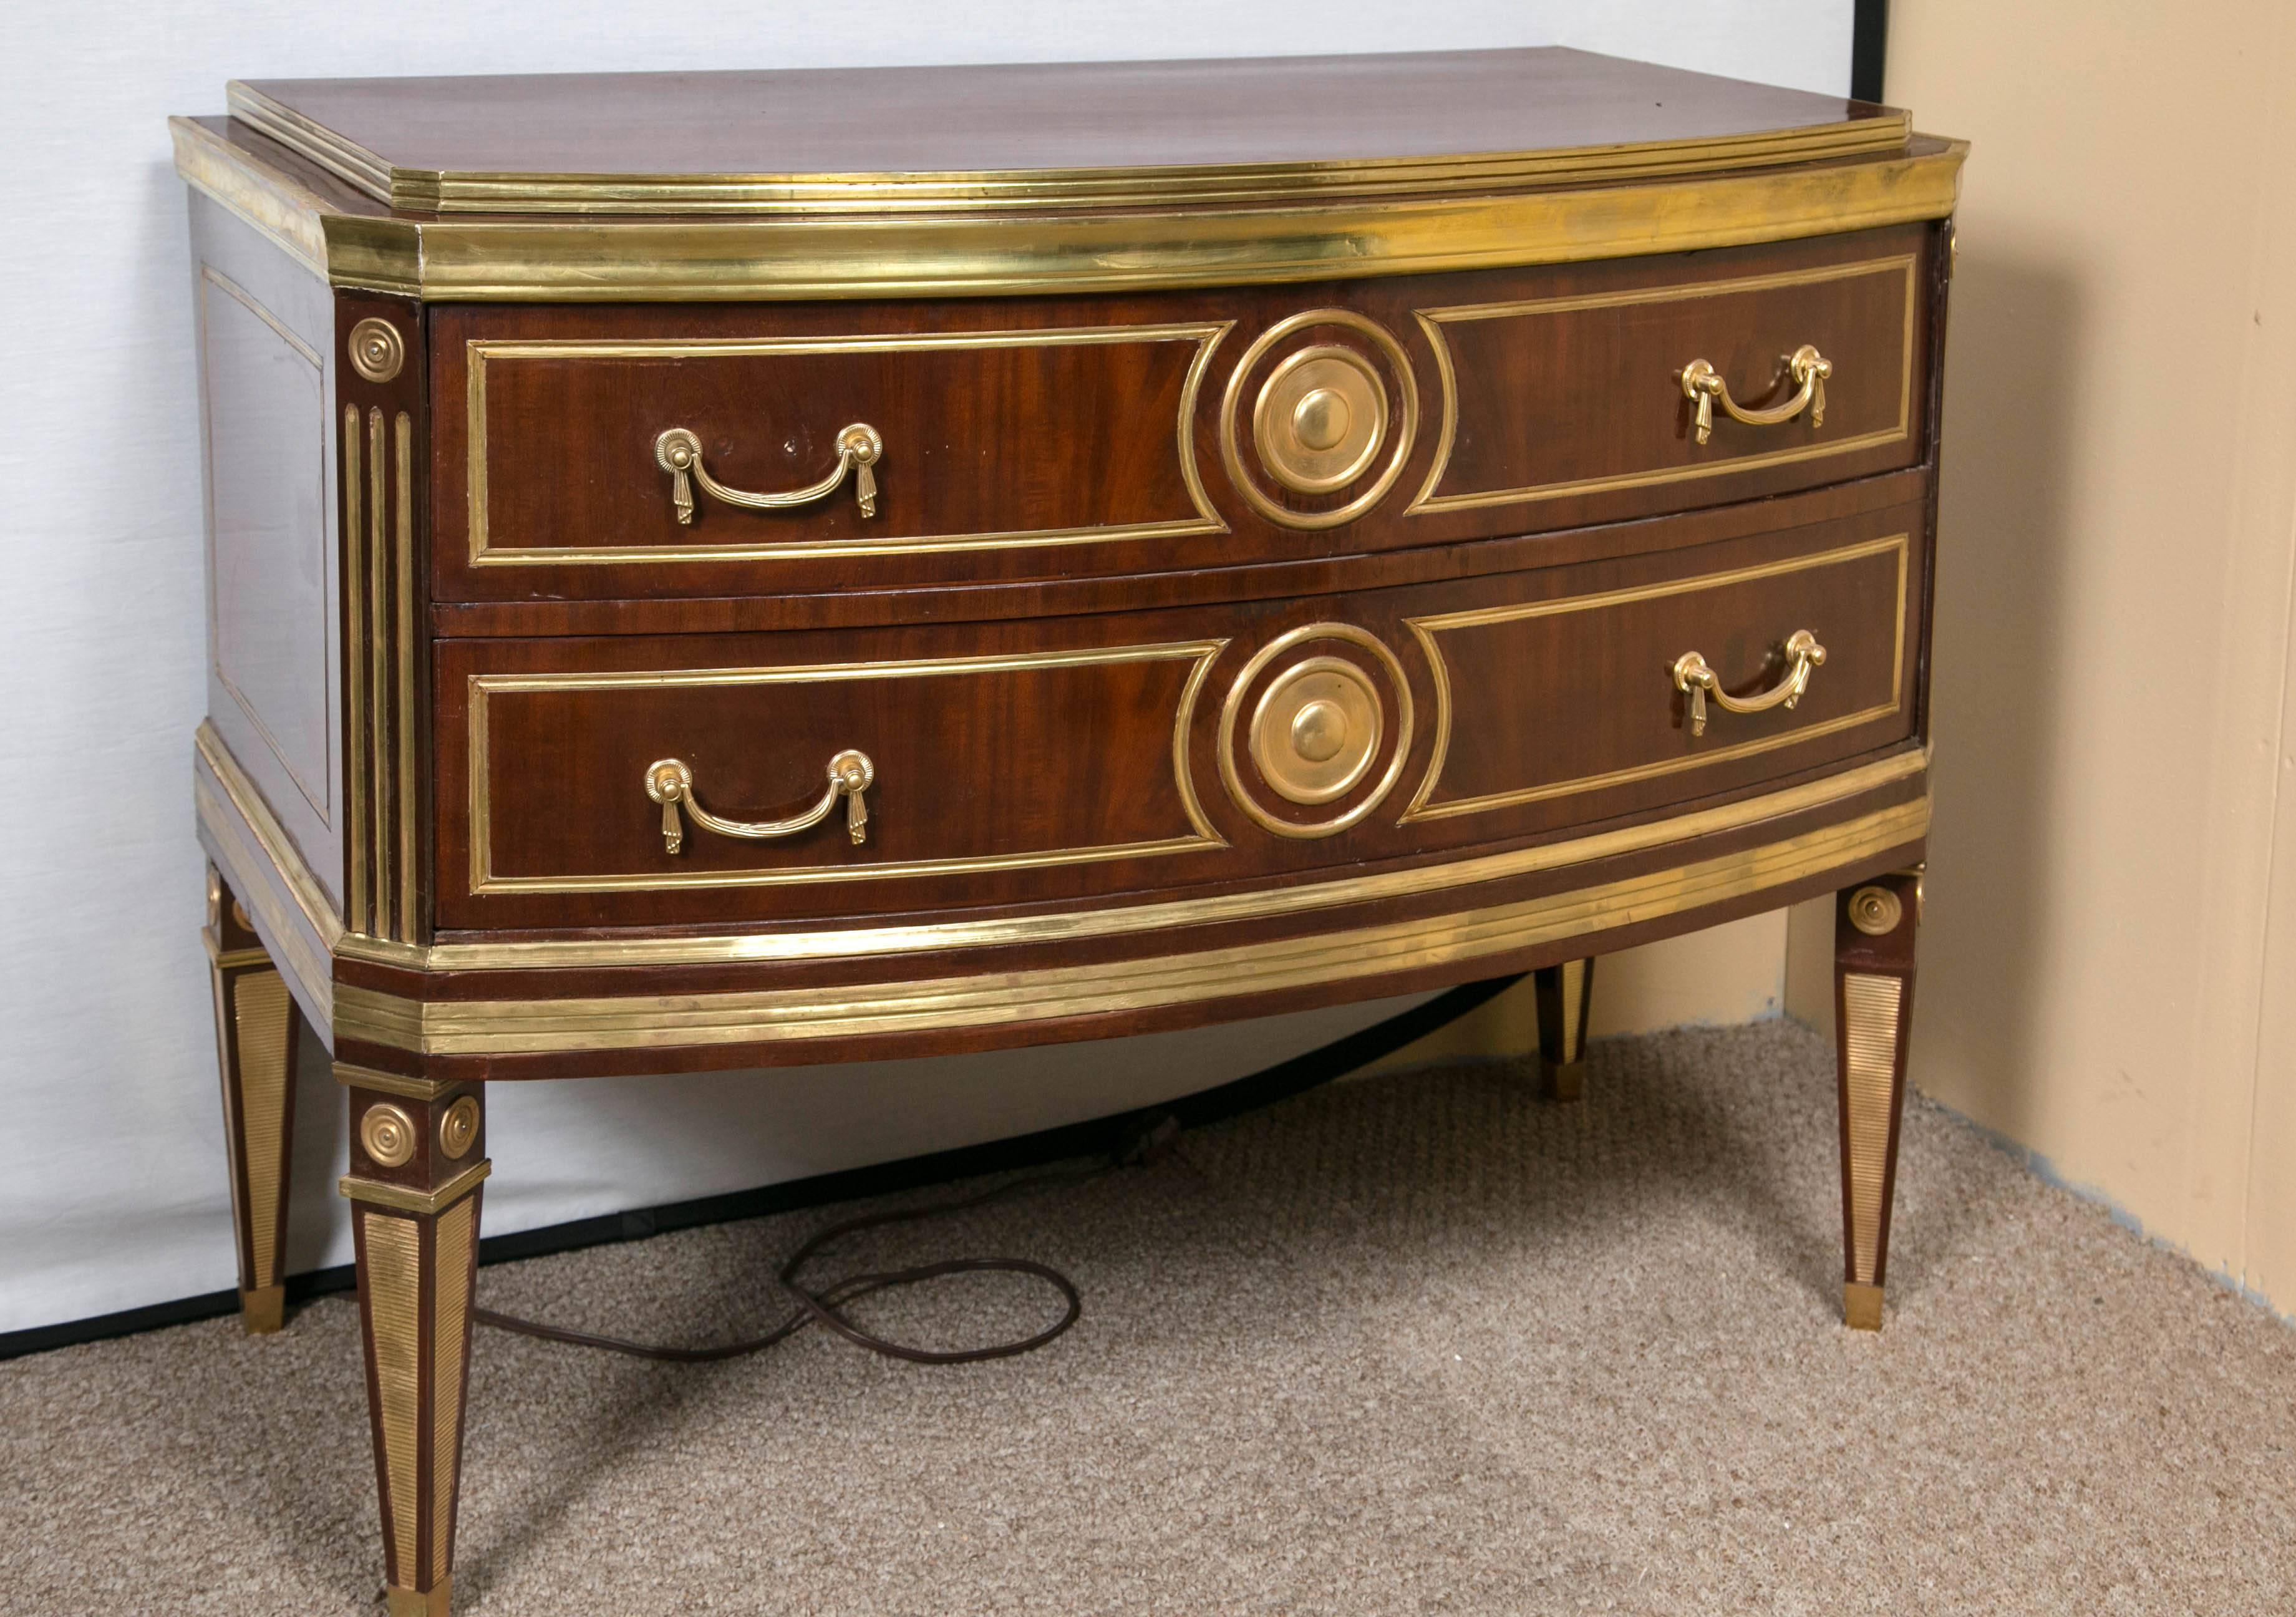 Pair of Russian neoclassical demilune commodes or bedside stands. One of a kind pair of fine quality commode or nightstands. Each having all-over bronze mounts with bronze framed drawers using drapery form pulls flanking a circular bronze decorative